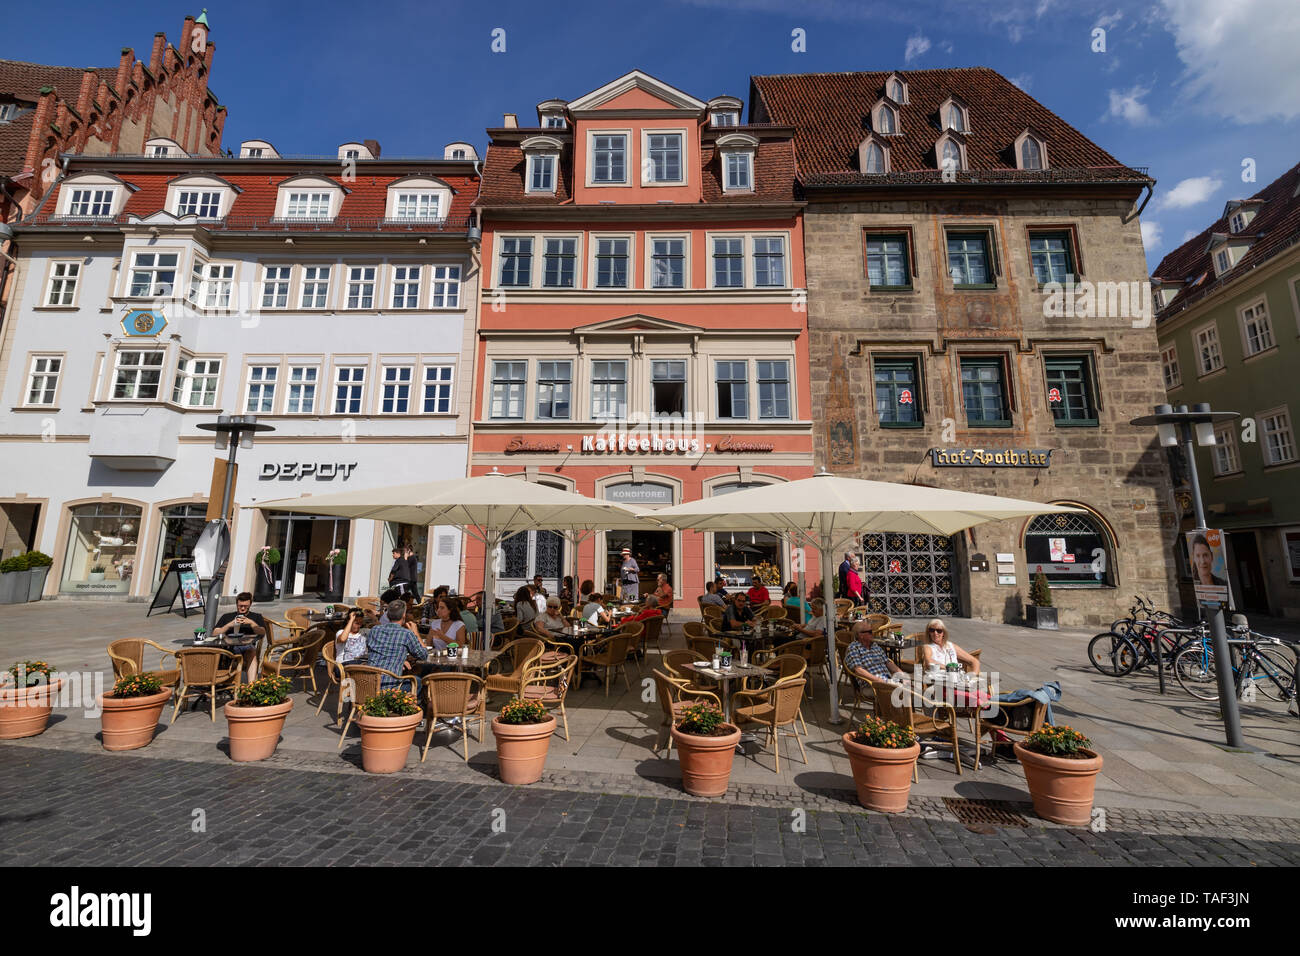 Beautiful facades on historic market square with outdoor café shop in Coburg, Germany Stock Photo